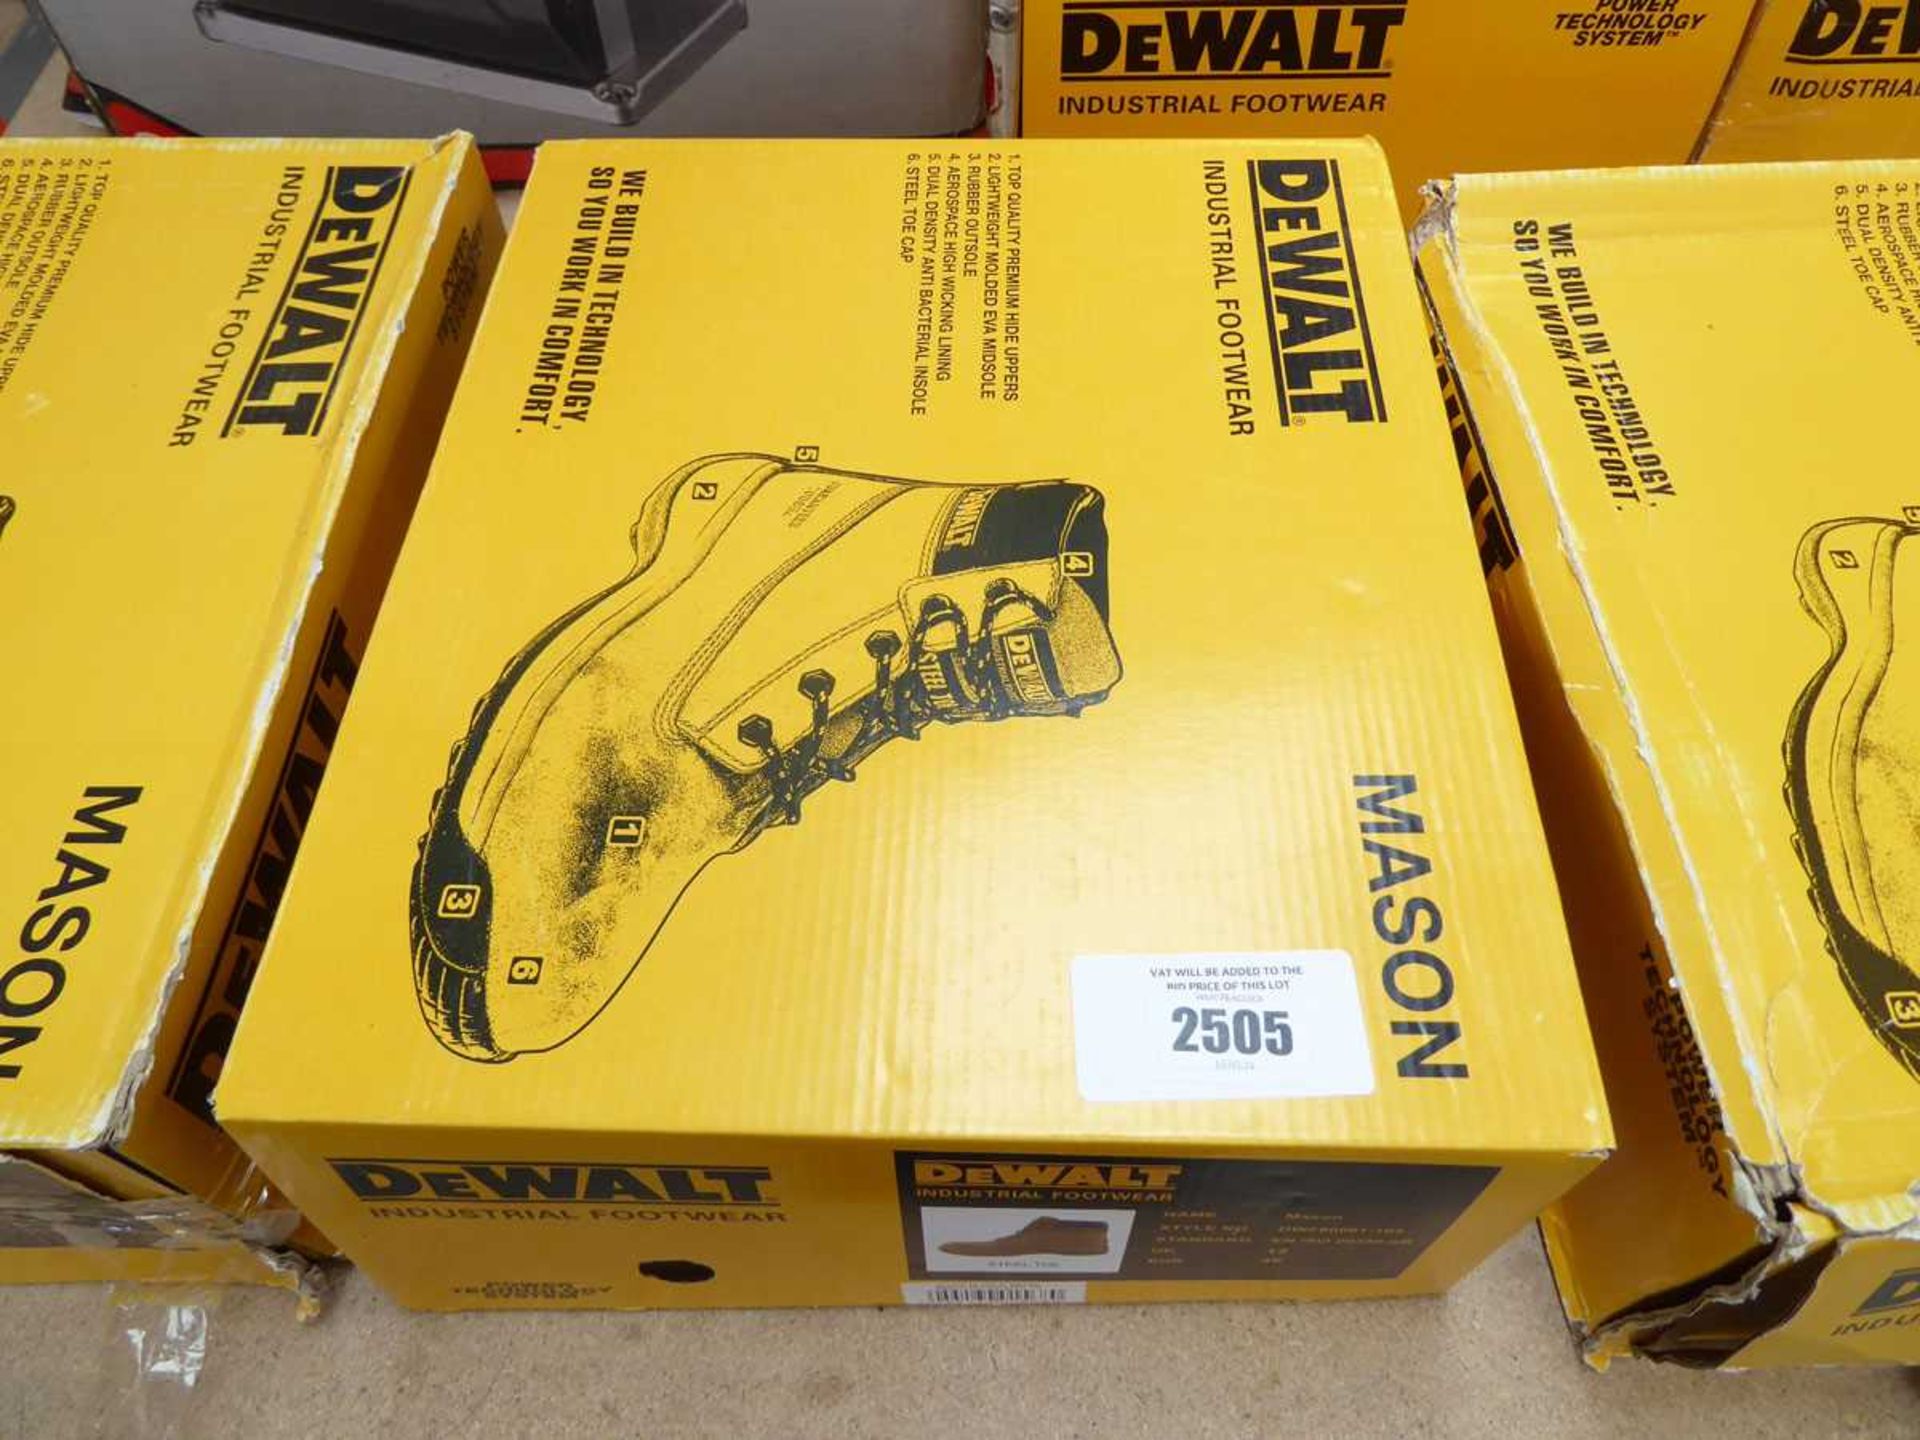 +VAT Boxed pair of DeWalt Mason steel toe safety boots in tan (size 12)